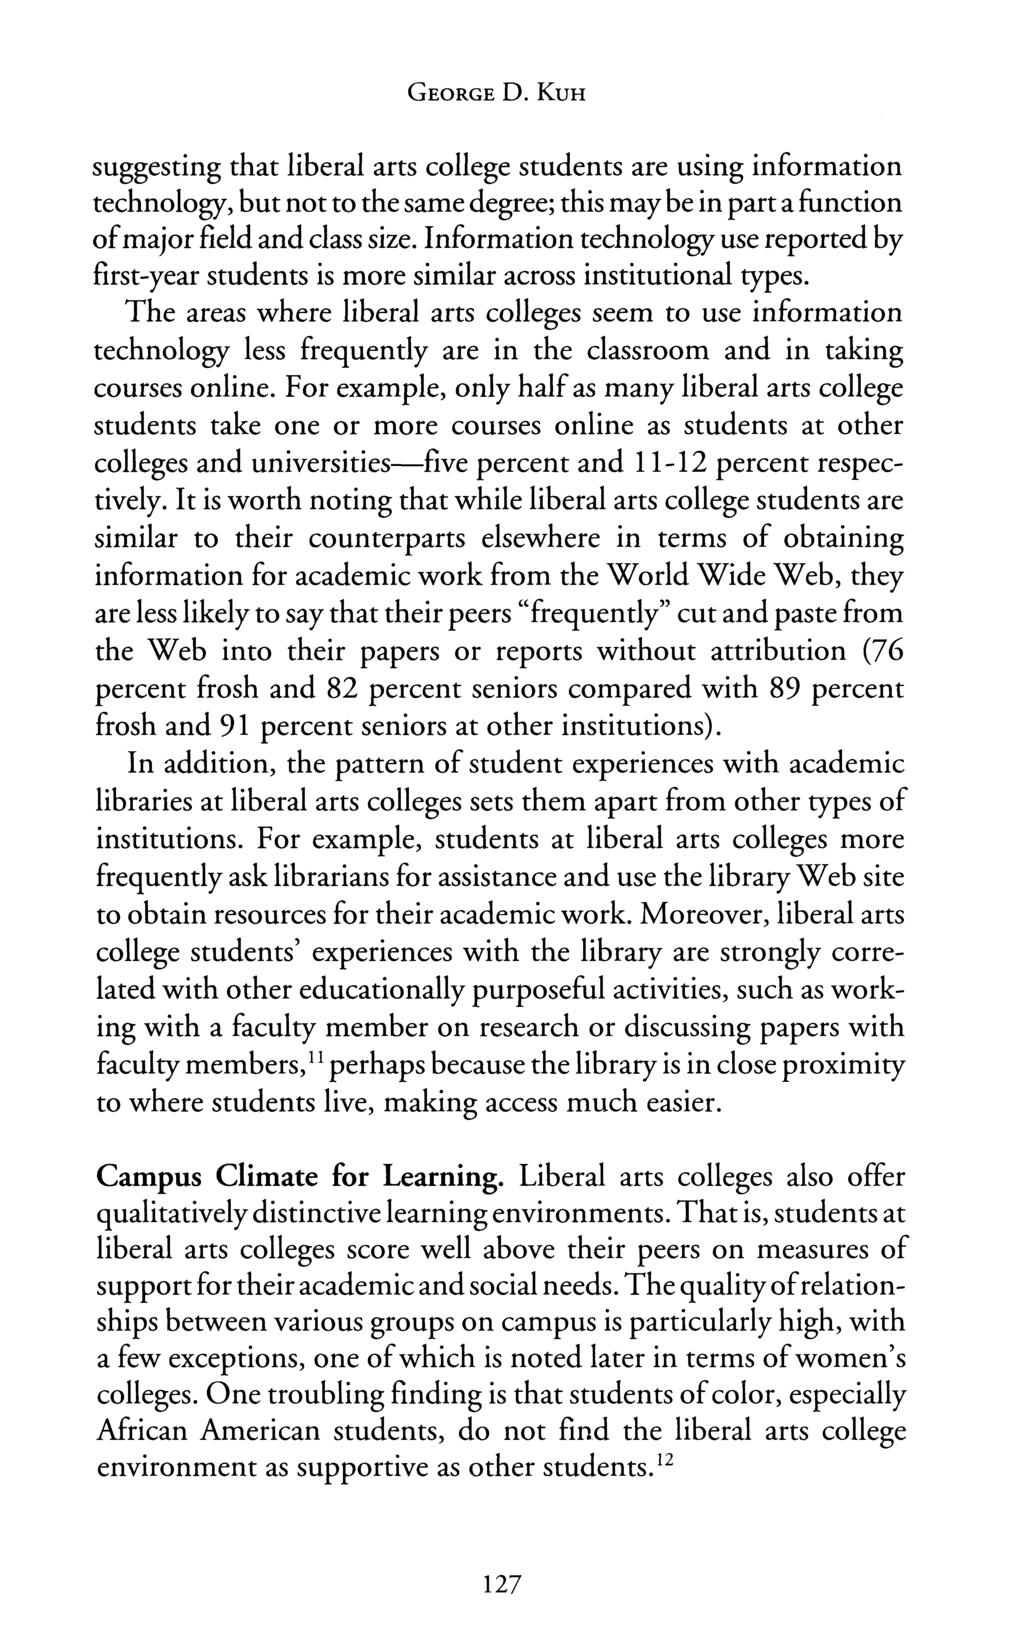 GEORGE D. KUH suggesting that liberal arts college students are using information technology, but not to the same degree; this may be in part a function of major field and class size.